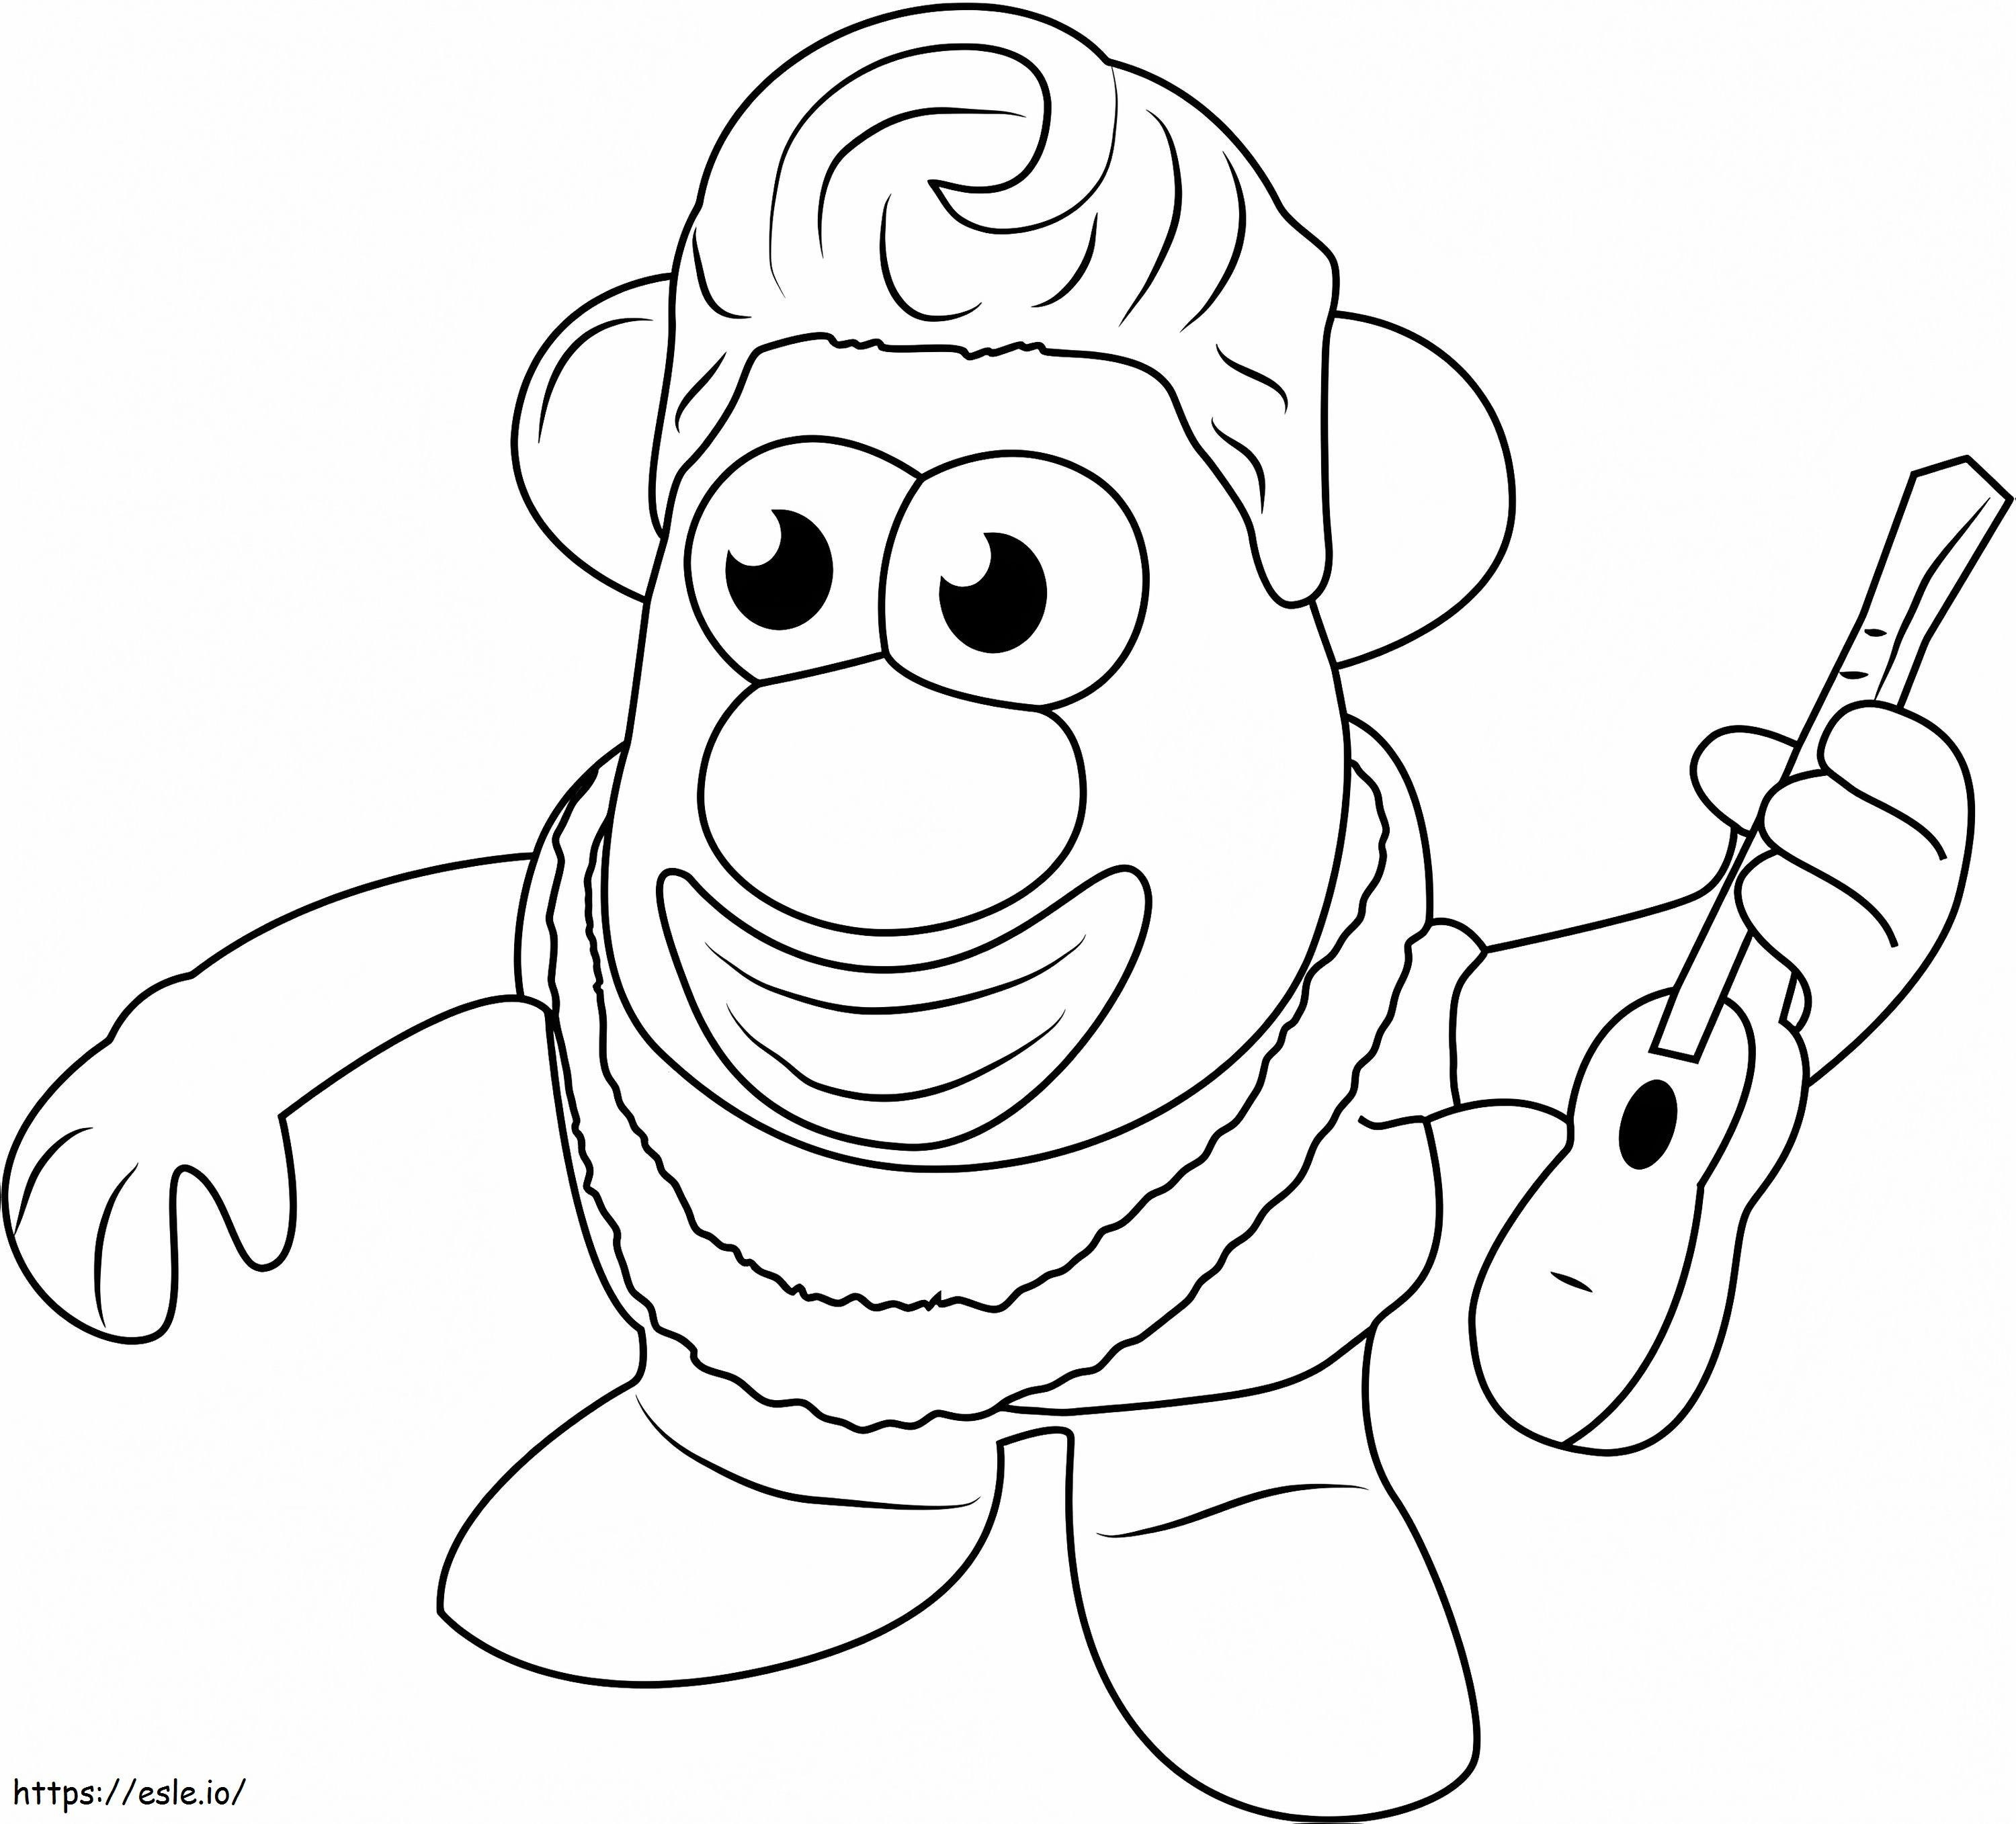 Mister Potato Holding Guitar A4 coloring page